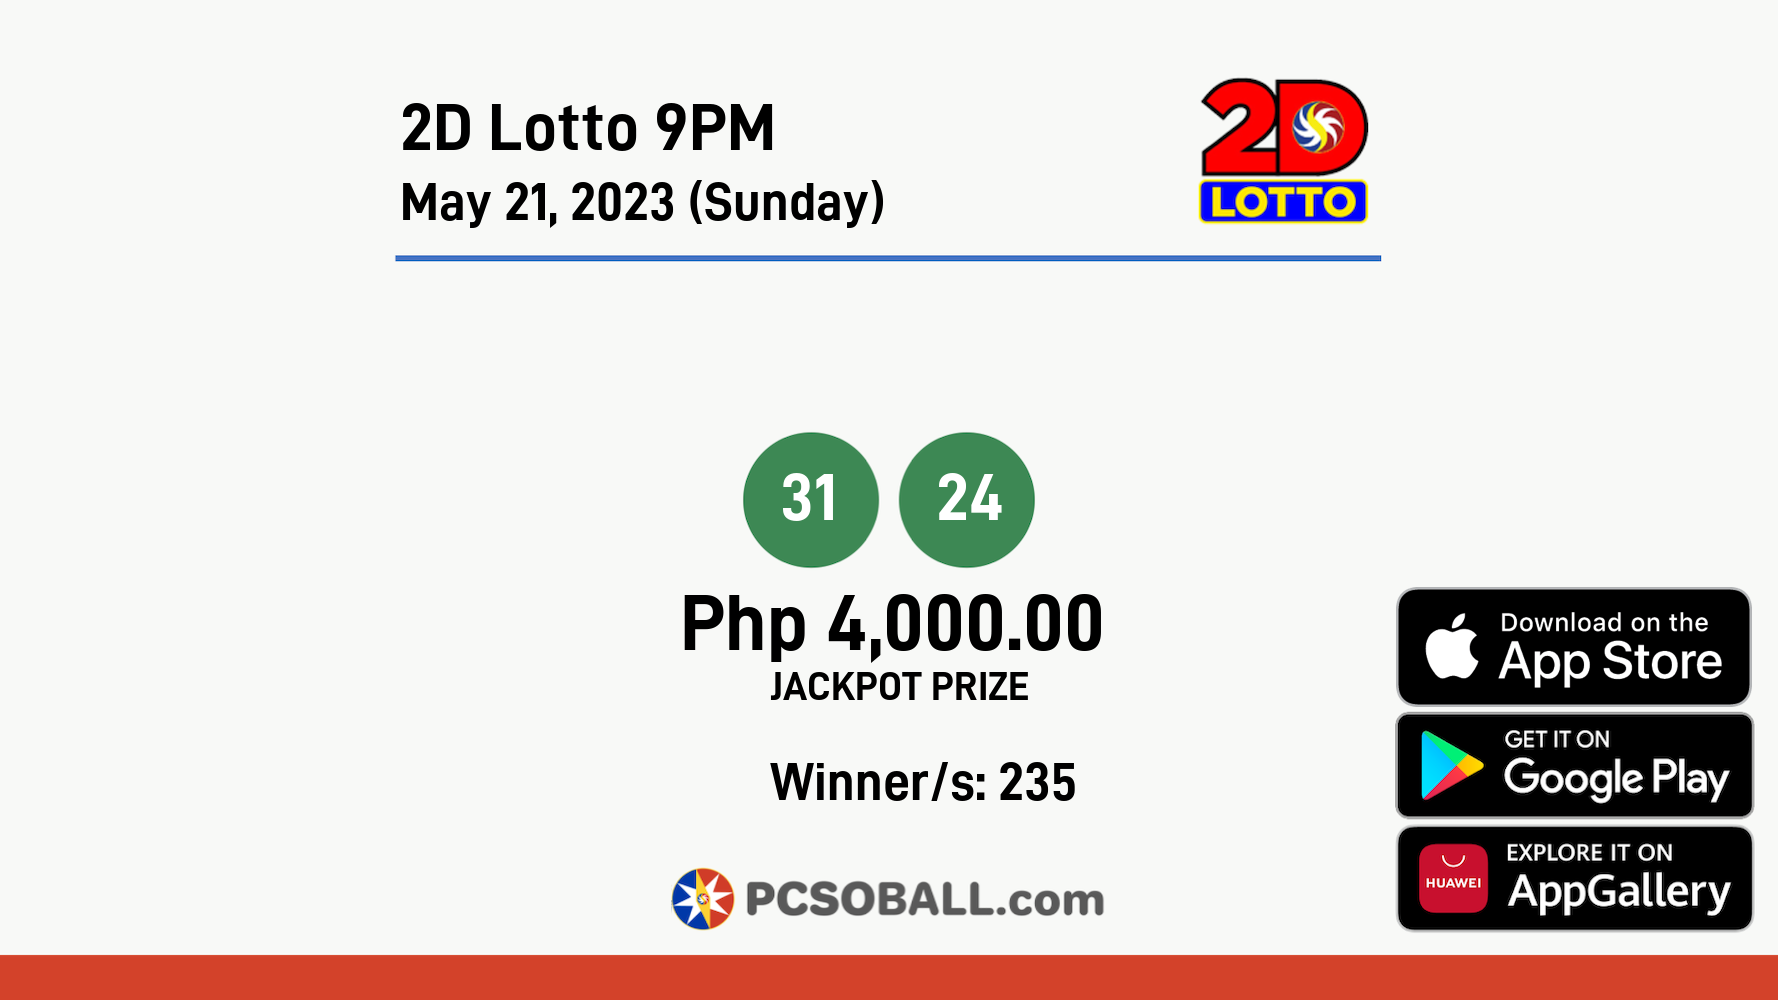 2D Lotto 9PM May 21, 2023 (Sunday) Result